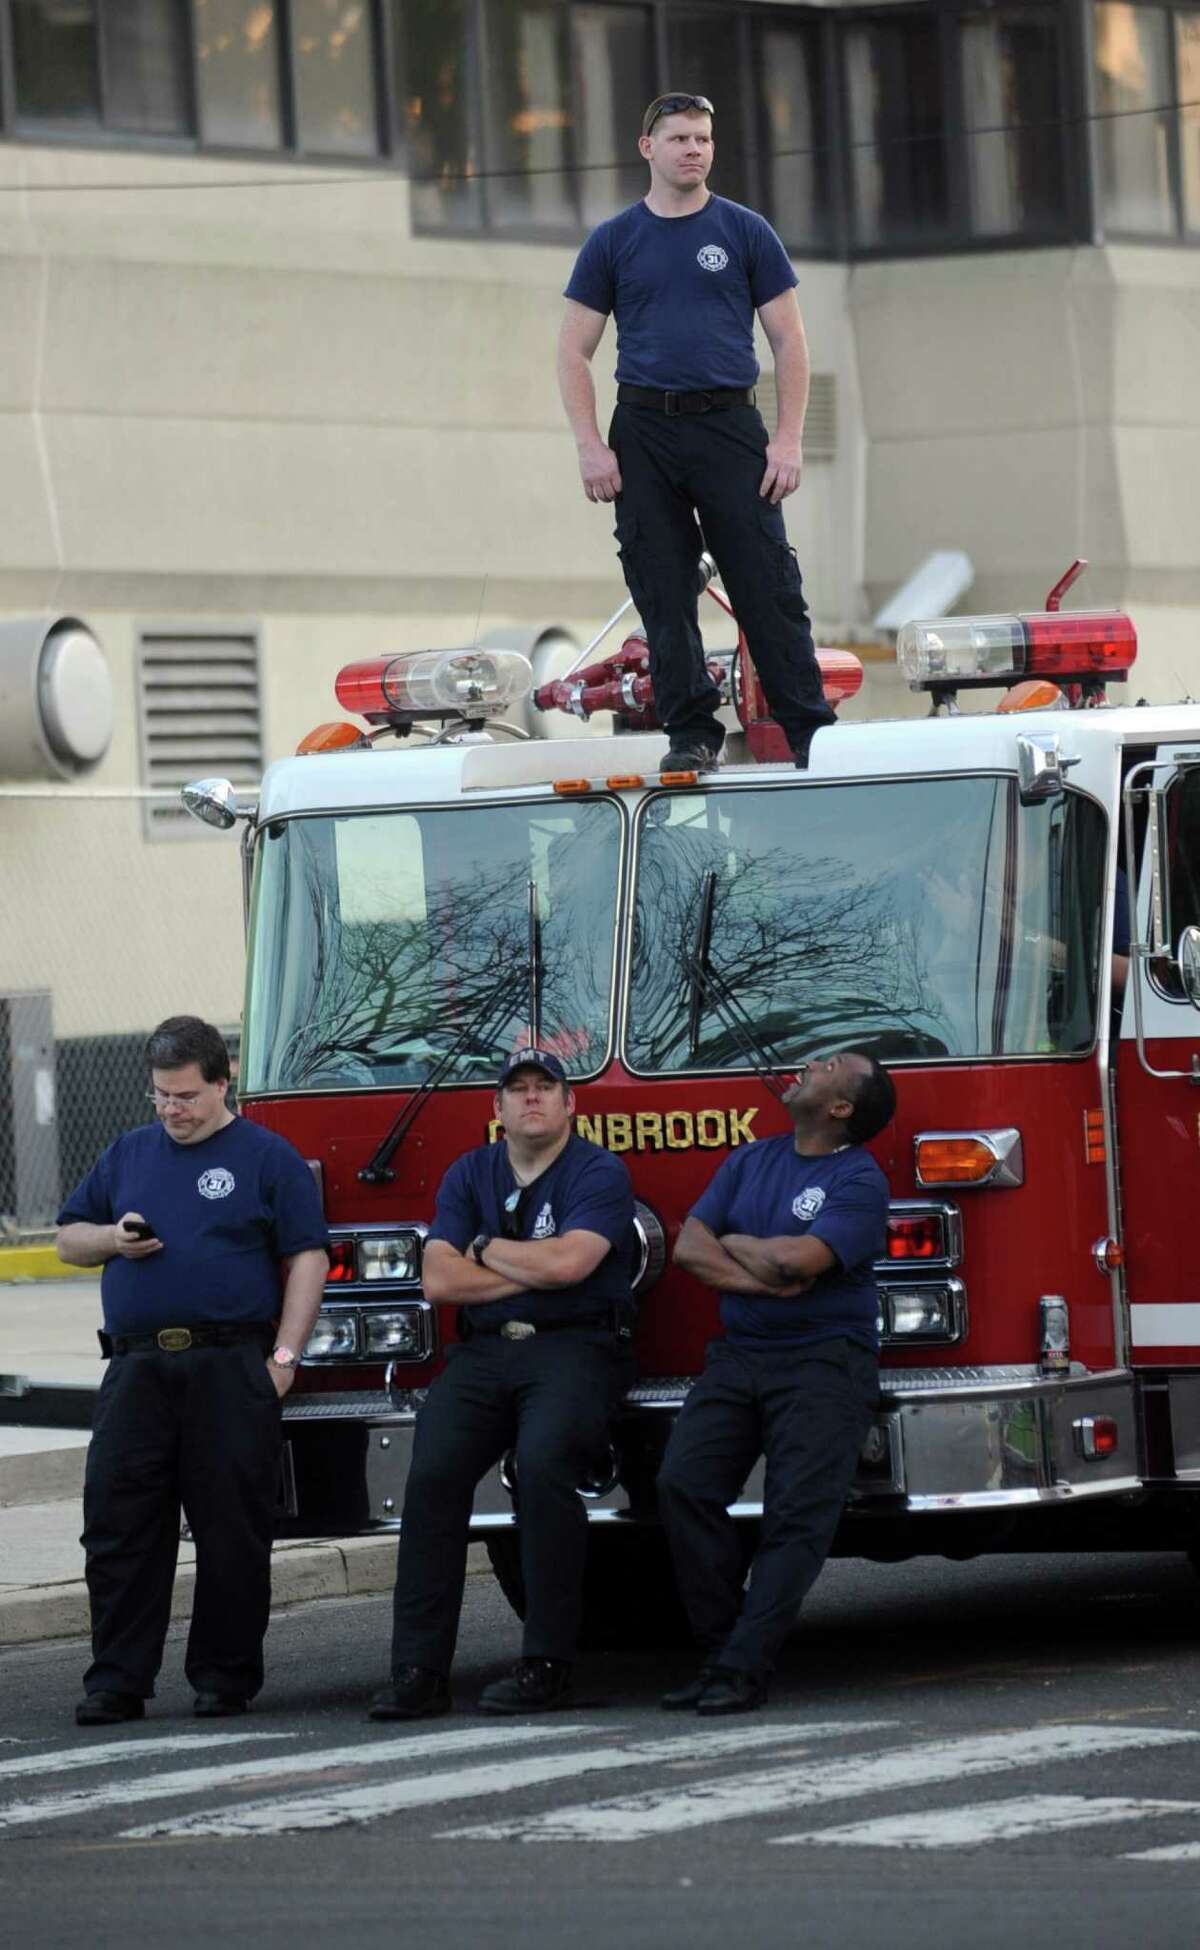 Members of the Glenbrook Fire Department watch the proceedings from their truck during the 6th annual Stamford Police Department Memorial Parade on Friday, May 4, 2012.